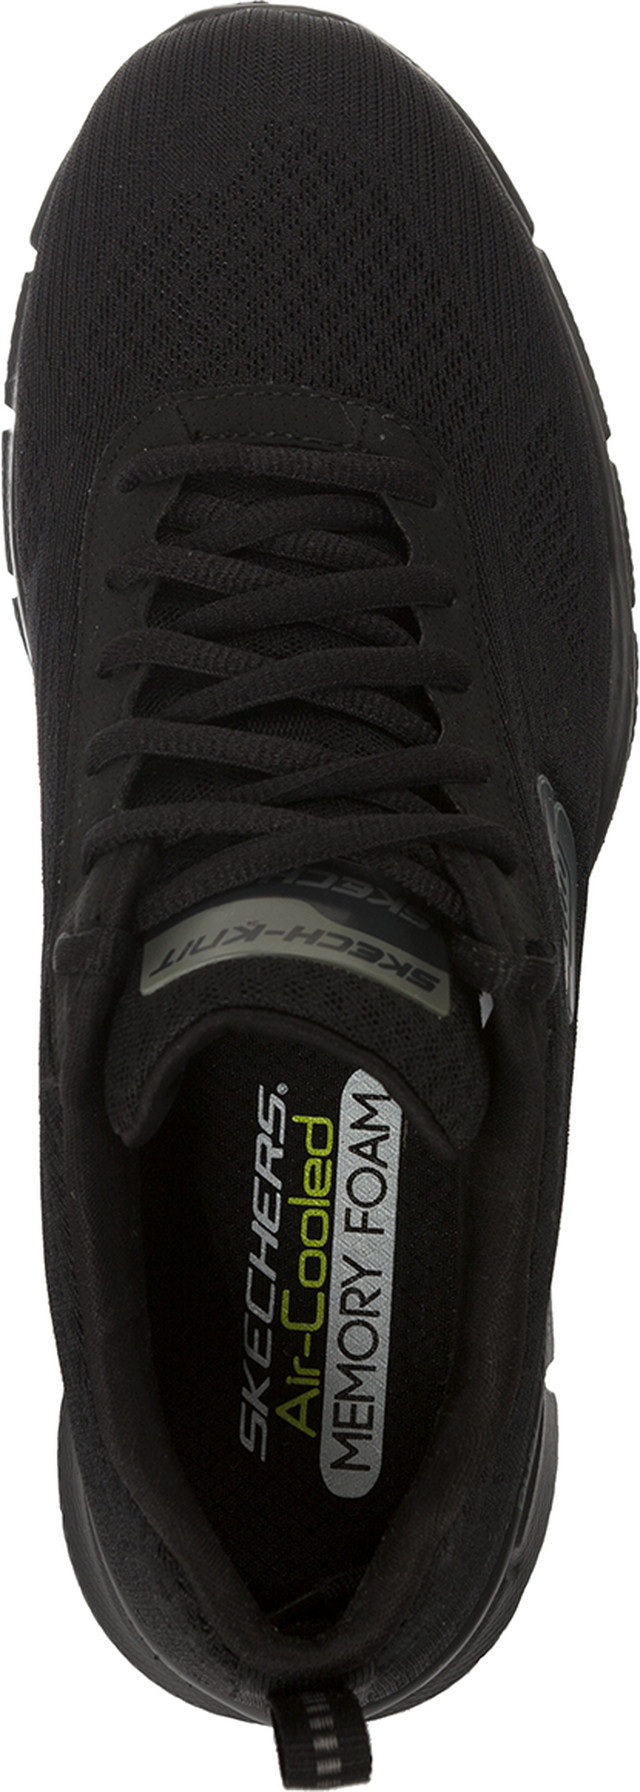 abstrakt sum Profet Skechers Air Cooled Memory Foam Opinie Online Sale, UP TO 70% OFF